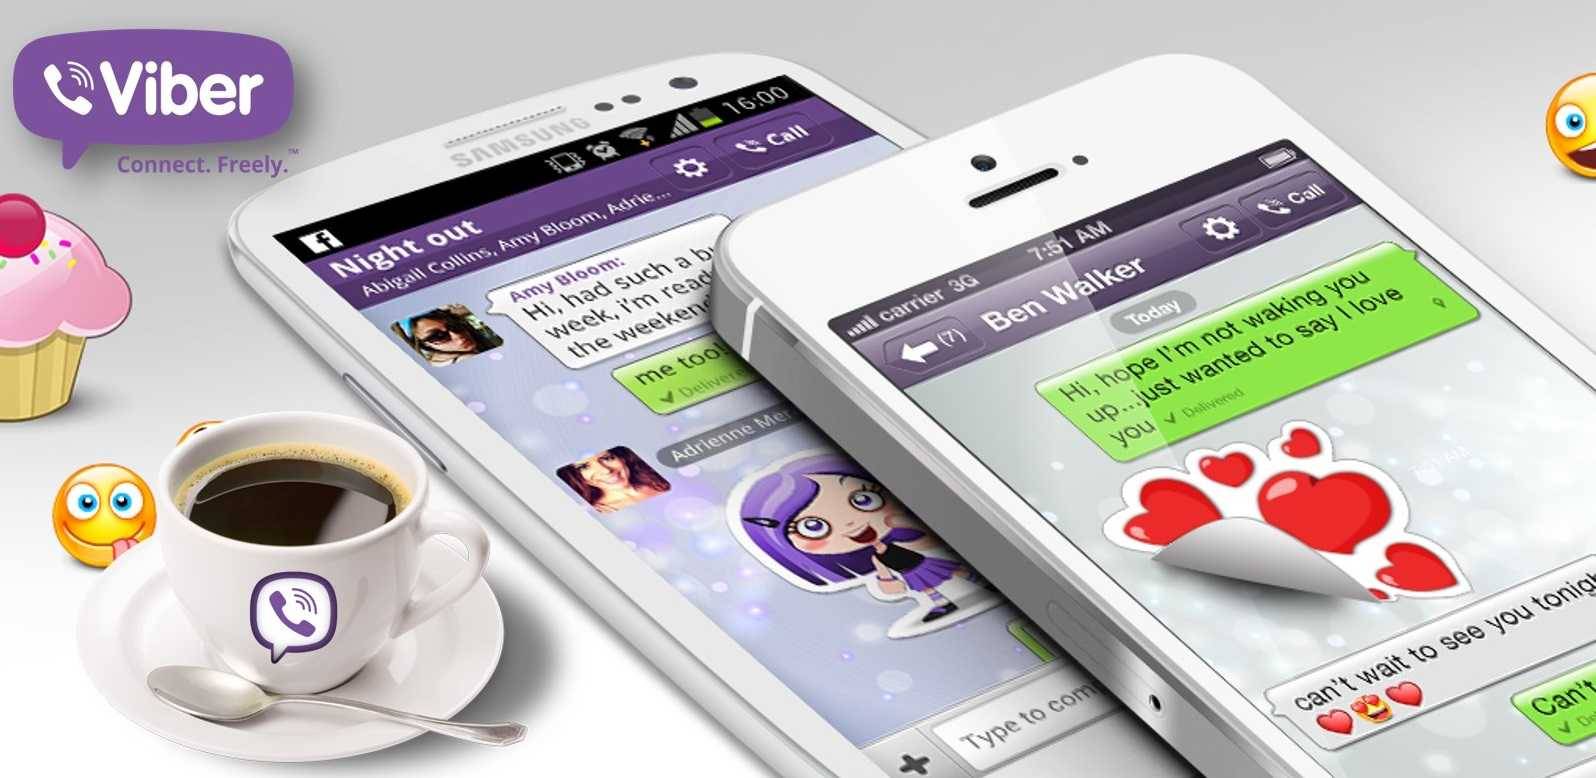 who invented viber app